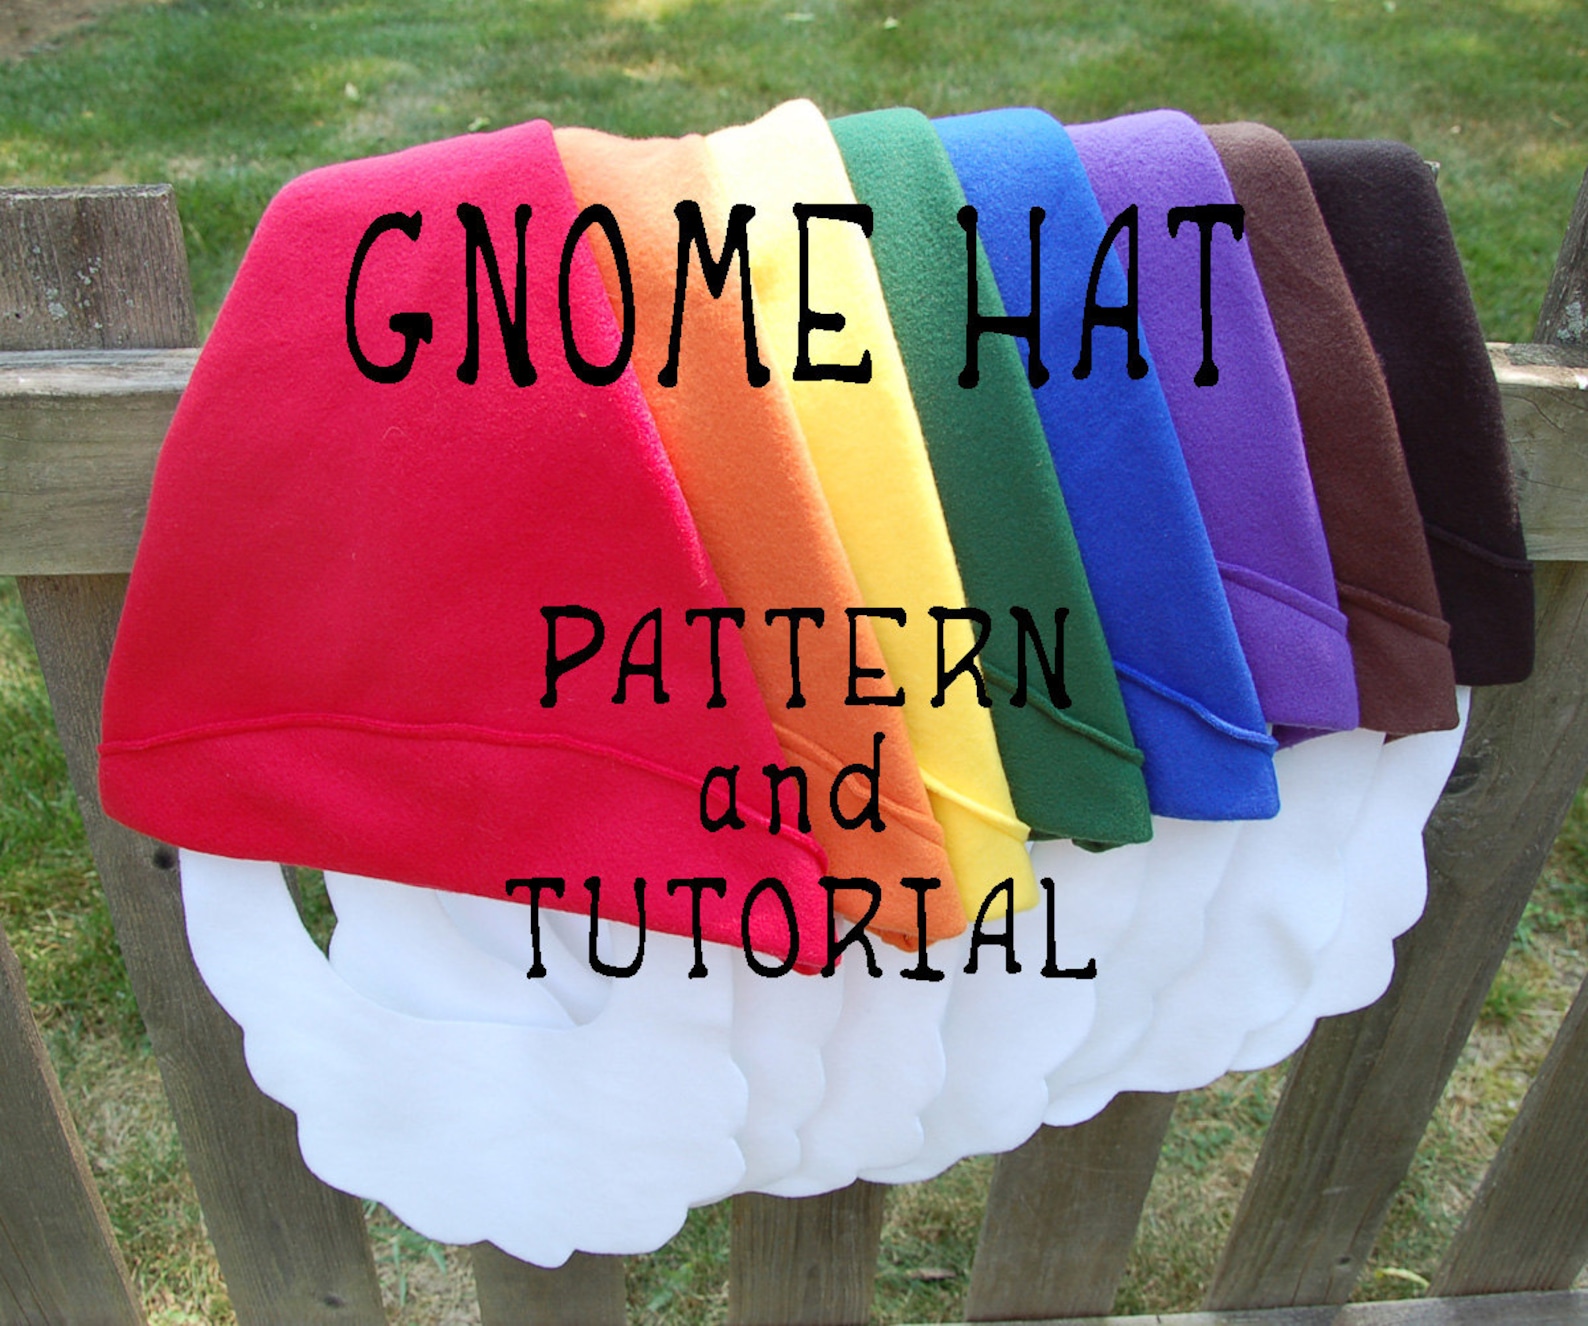 gnome-hat-pattern-and-tutorial-etsy-australia